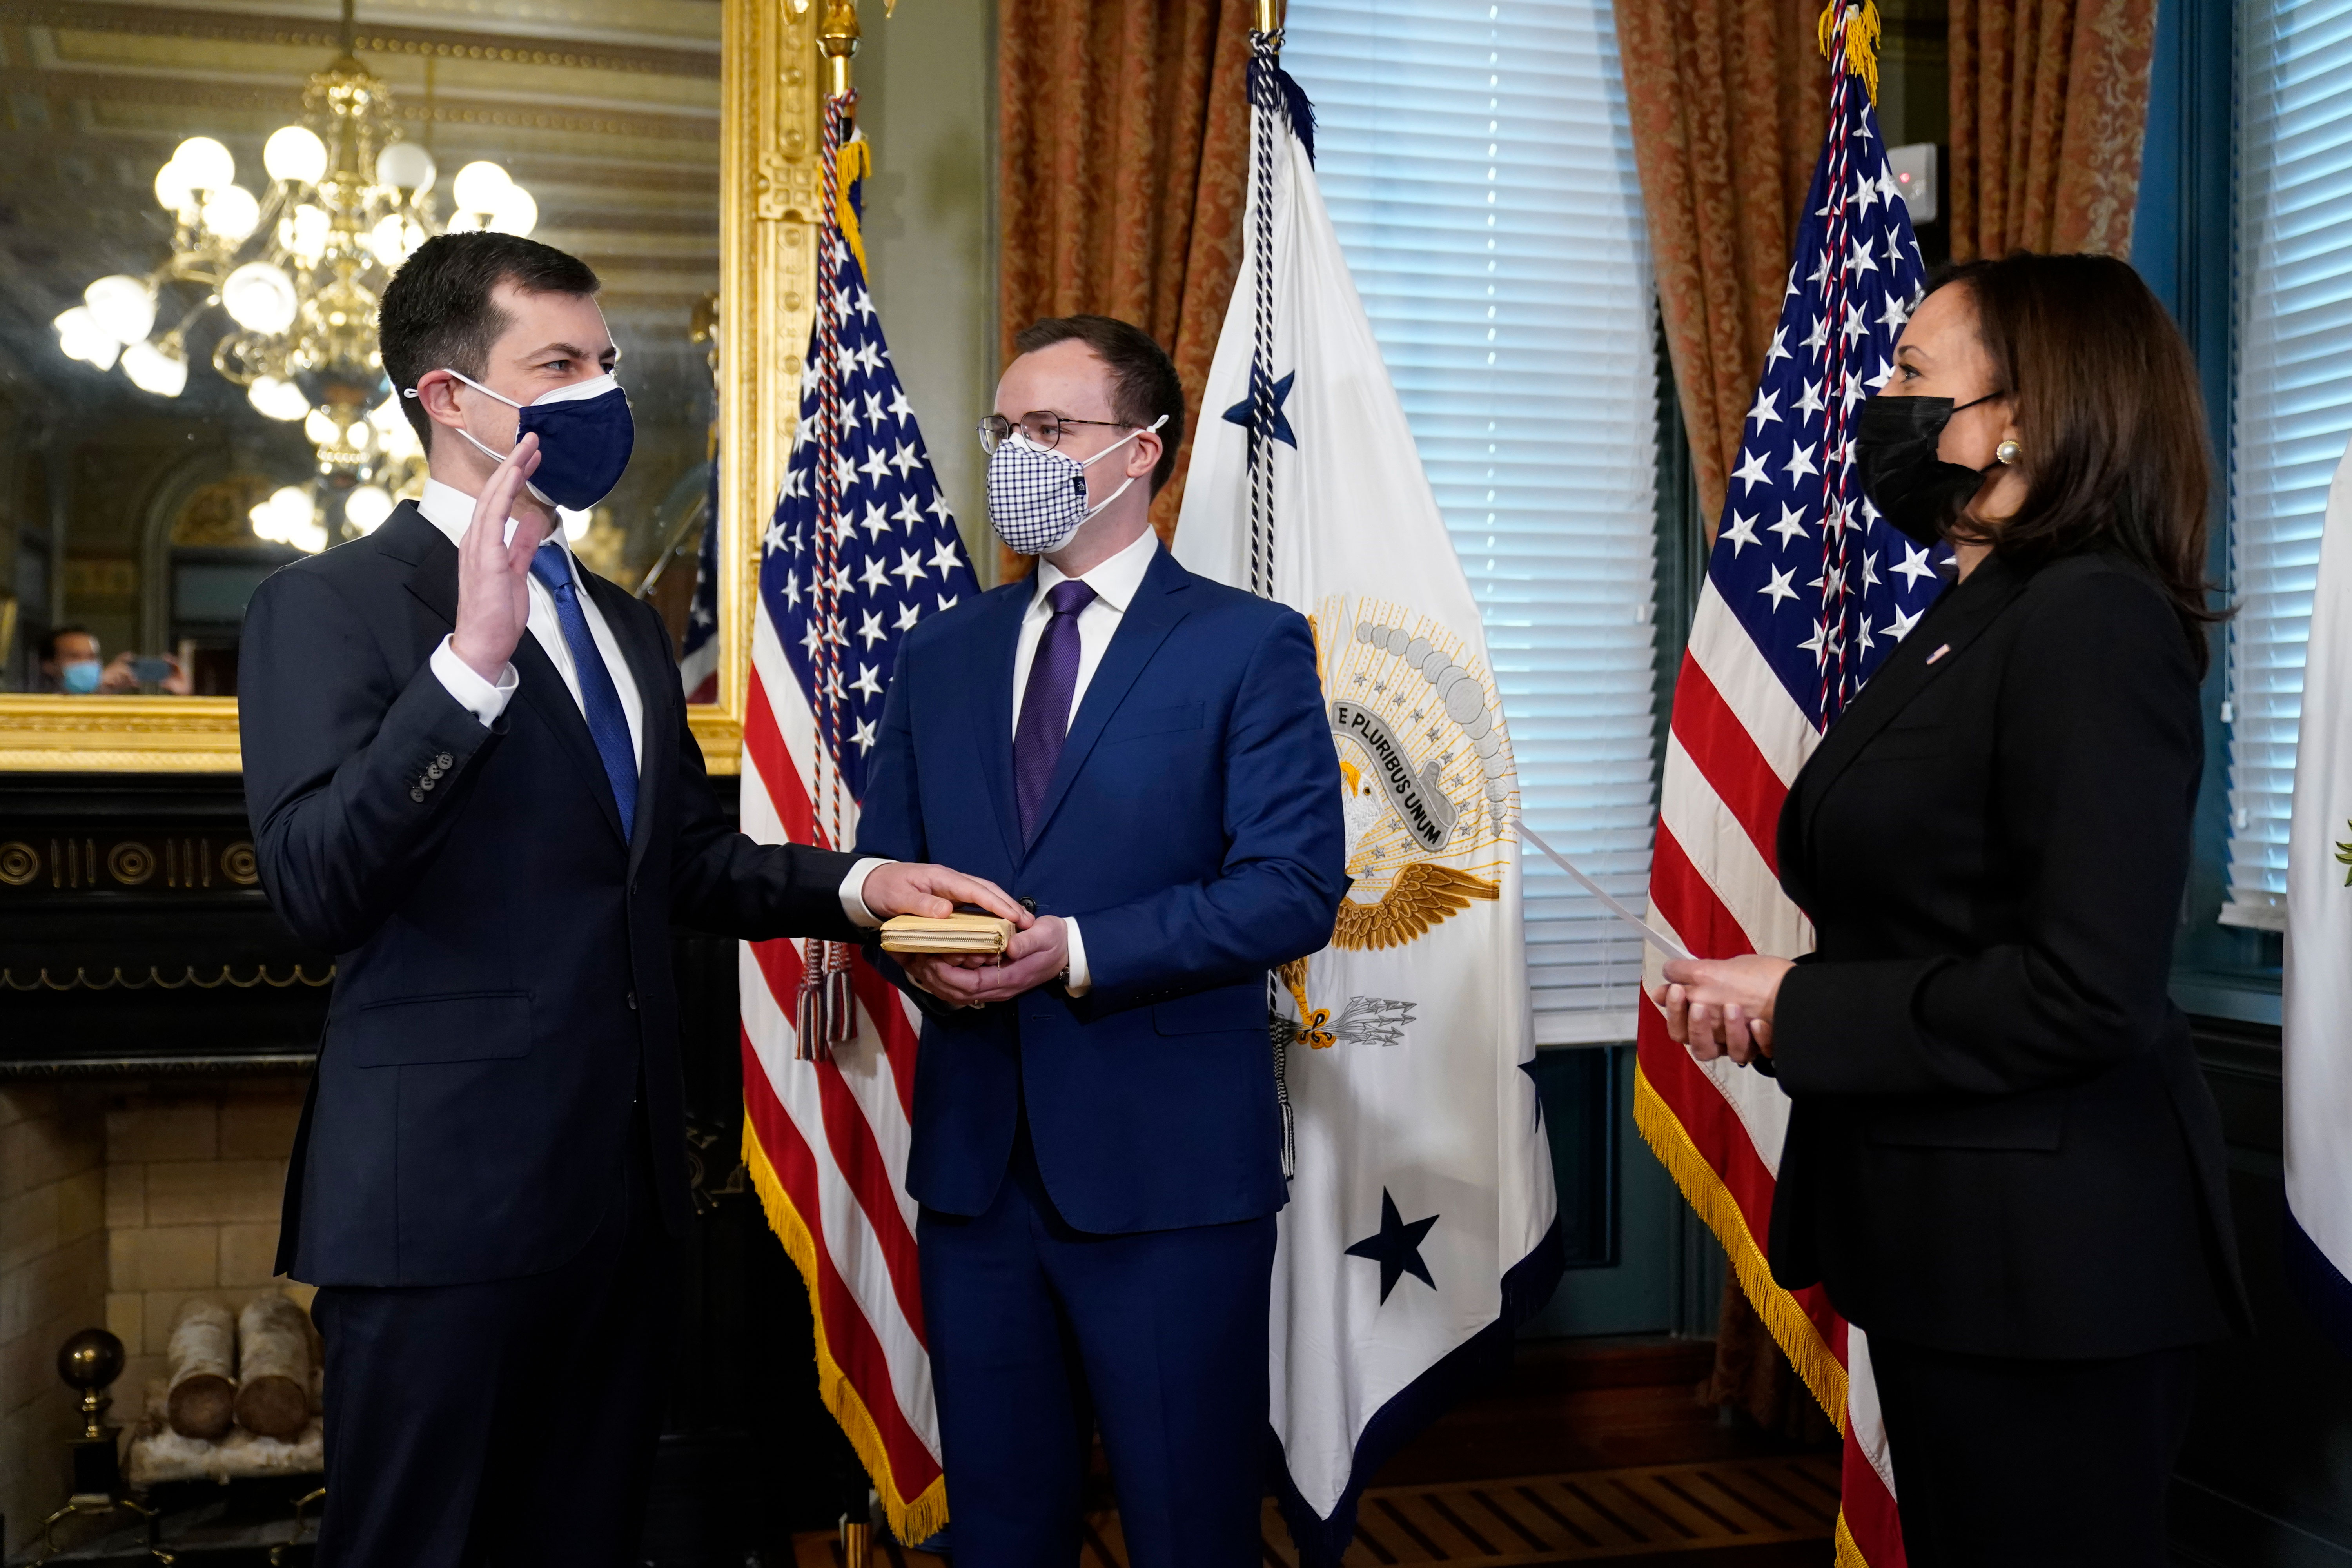 Pete Buttigieg, with his hand on a Bible held by his husband Chasten Buttigieg, is sworn in as transportation secretary by Vice President Kamala Harris in Washington, DC, on February 3.